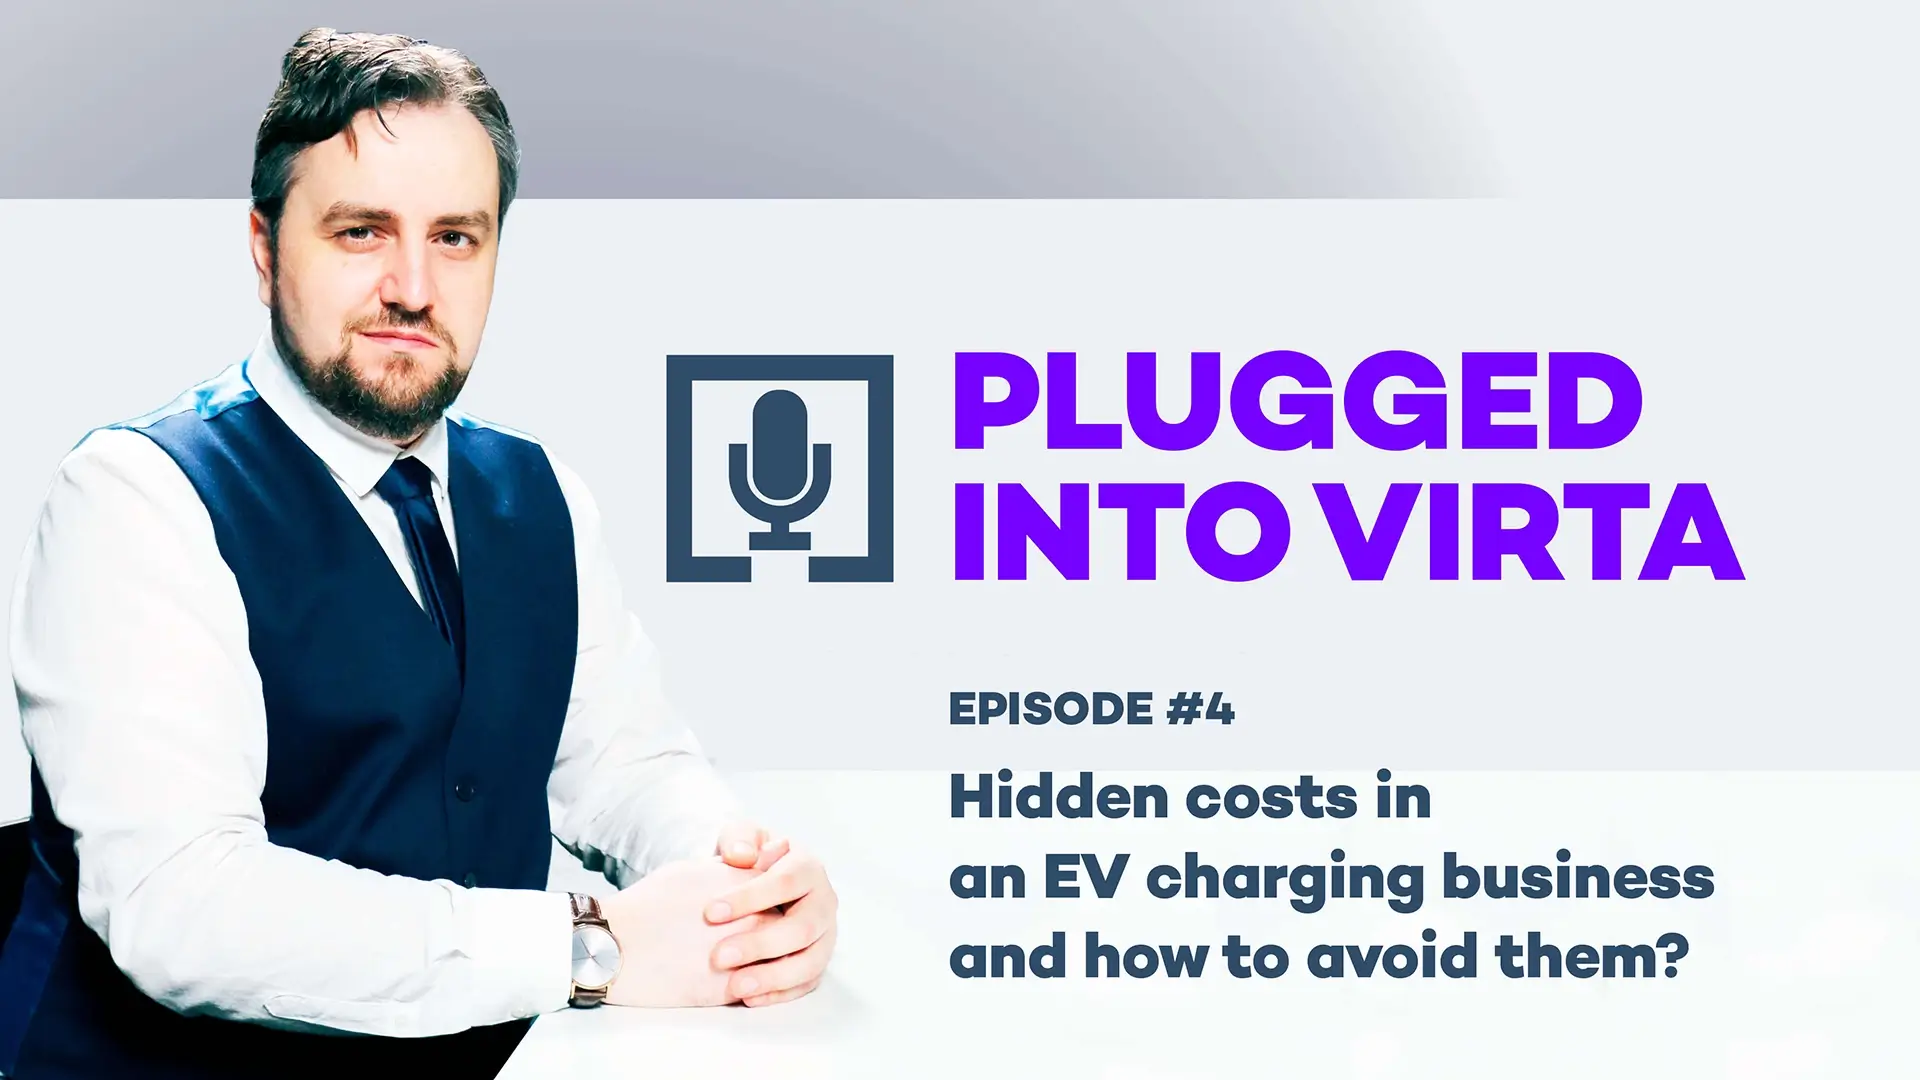 Plugged into Virta Episode 4 Hidden costs in an EV charging business and how to avoid them